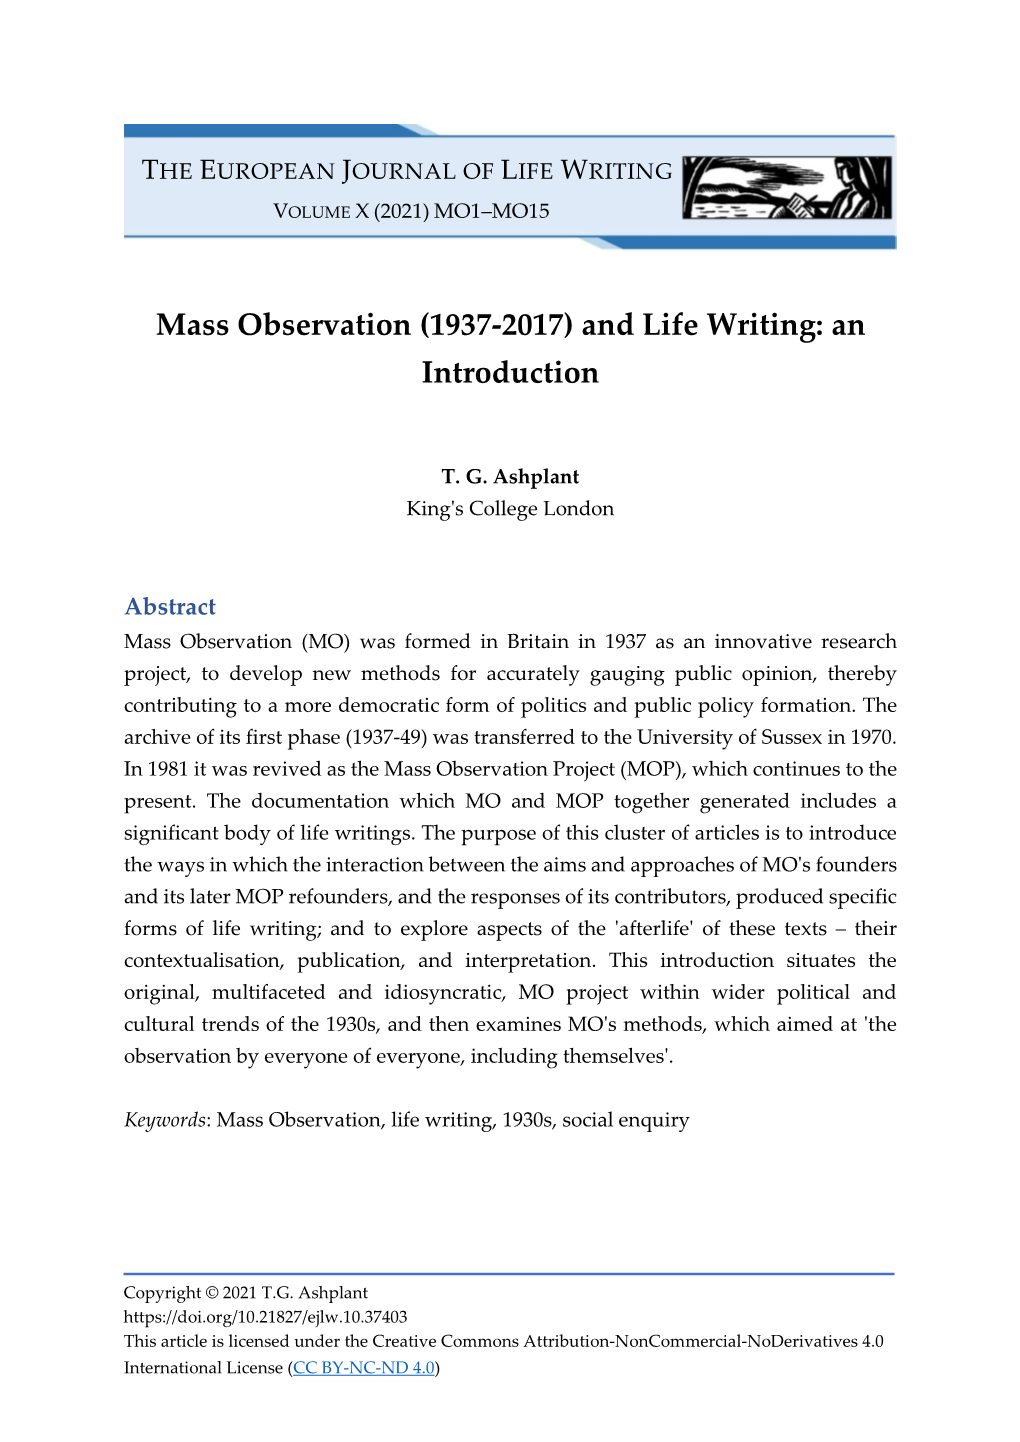 Mass Observation (1937-2017) and Life Writing: an Introduction